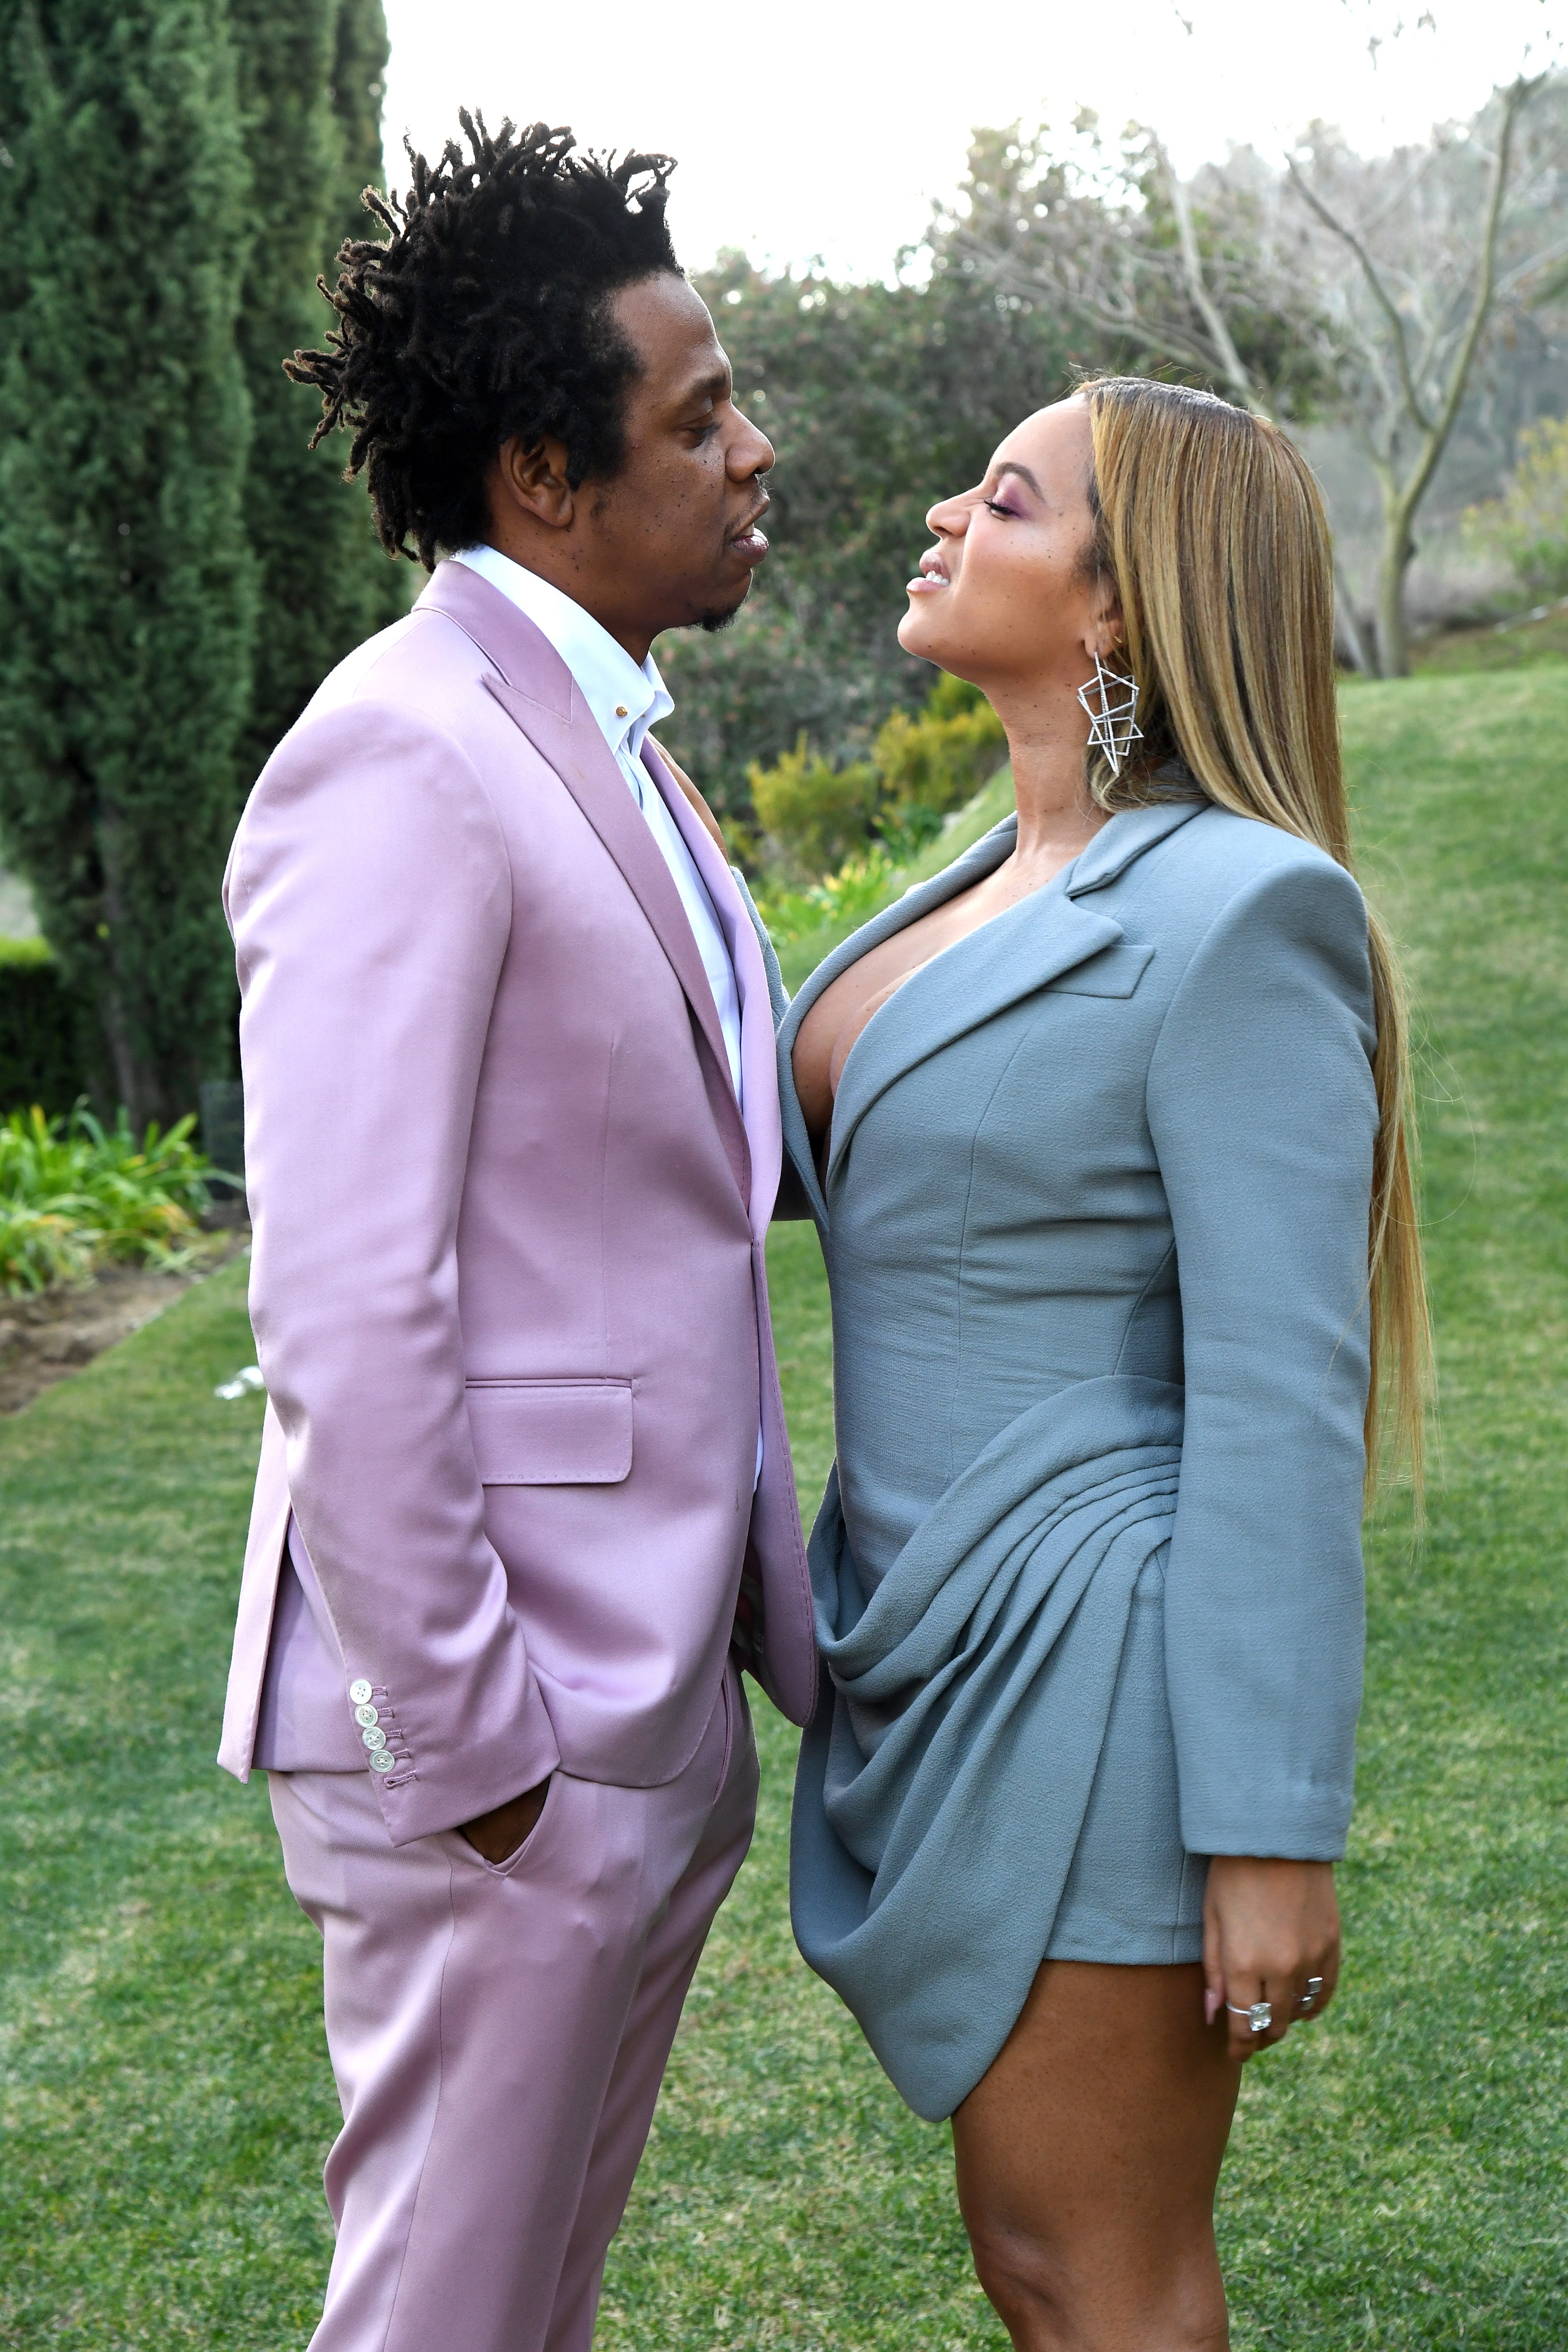 Here's Every Envy-Inducing Picture From The Roc Nation Brunch 2020